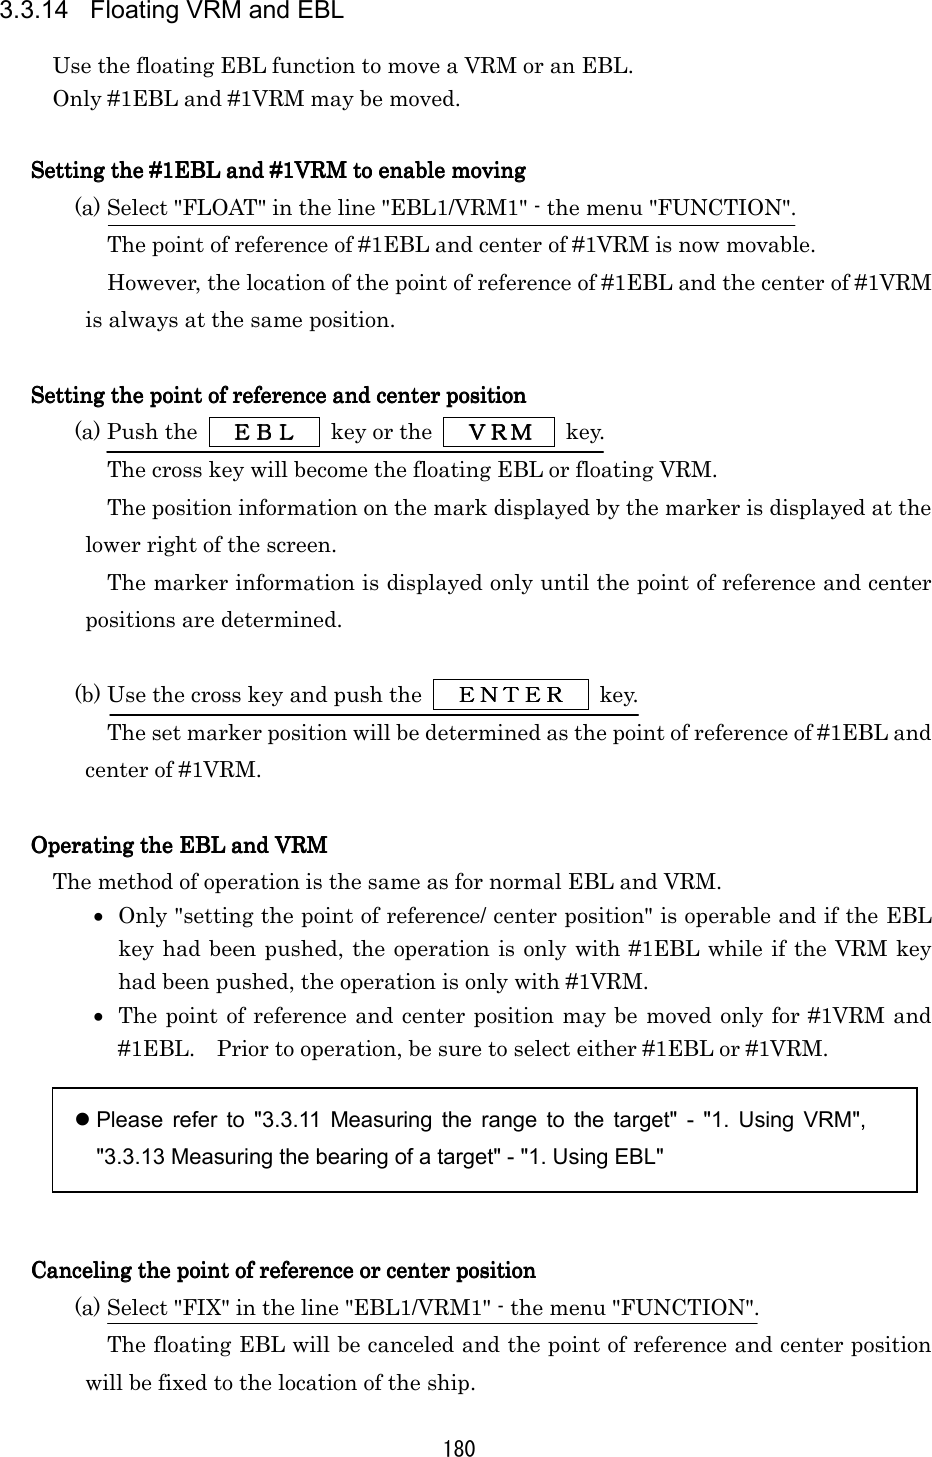 180 3.3.14  Floating VRM and EBL Use the floating EBL function to move a VRM or an EBL. Only #1EBL and #1VRM may be moved.  Setting the #1EBL and #1VRM to enable movingSetting the #1EBL and #1VRM to enable movingSetting the #1EBL and #1VRM to enable movingSetting the #1EBL and #1VRM to enable moving    (a) Select &quot;FLOAT&quot; in the line &quot;EBL1/VRM1&quot; - the menu &quot;FUNCTION&quot;. The point of reference of #1EBL and center of #1VRM is now movable. However, the location of the point of reference of #1EBL and the center of #1VRM is always at the same position.  Setting the point of reference and centSetting the point of reference and centSetting the point of reference and centSetting the point of reference and center positioner positioner positioner position    (a) Push the   ＥＢＬＥＢＬＥＢＬＥＢＬ   key or the   ＶＲＭＶＲＭＶＲＭＶＲＭ  key. The cross key will become the floating EBL or floating VRM. The position information on the mark displayed by the marker is displayed at the lower right of the screen. The marker information is displayed only until the point of reference and center positions are determined.  (b) Use the cross key and push the   ＥＮＴＥＲＥＮＴＥＲＥＮＴＥＲＥＮＴＥＲ  key. The set marker position will be determined as the point of reference of #1EBL and center of #1VRM.  Operating the EBL and VRMOperating the EBL and VRMOperating the EBL and VRMOperating the EBL and VRM    The method of operation is the same as for normal EBL and VRM. •  Only &quot;setting the point of reference/ center position&quot; is operable and if the EBL key had been pushed, the operation is only with #1EBL while if the VRM key had been pushed, the operation is only with #1VRM. •  The point of reference and center position may be moved only for #1VRM and #1EBL.    Prior to operation, be sure to select either #1EBL or #1VRM.   Please refer to &quot;3.3.11 Measuring the range to the target&quot; - &quot;1. Using VRM&quot;, &quot;3.3.13 Measuring the bearing of a target&quot; - &quot;1. Using EBL&quot;   Canceling the point of reference or center positionCanceling the point of reference or center positionCanceling the point of reference or center positionCanceling the point of reference or center position    (a) Select &quot;FIX&quot; in the line &quot;EBL1/VRM1&quot; - the menu &quot;FUNCTION&quot;. The floating EBL will be canceled and the point of reference and center position will be fixed to the location of the ship. 